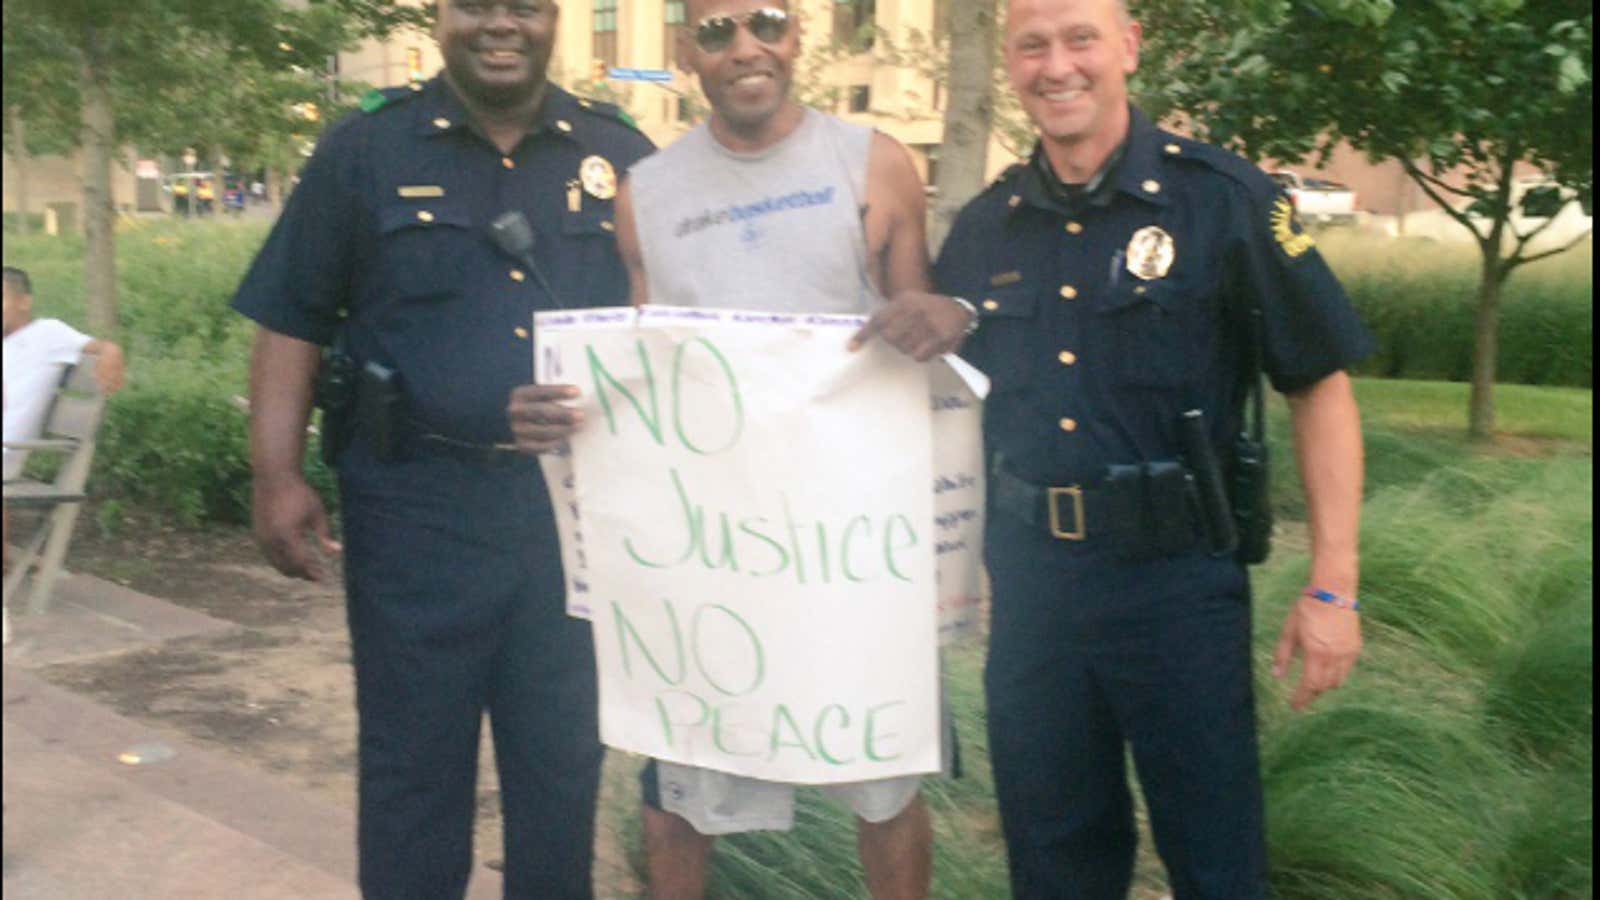 Before the chaos, a photo of peace between two Dallas police officers and a Black Lives Matter protester